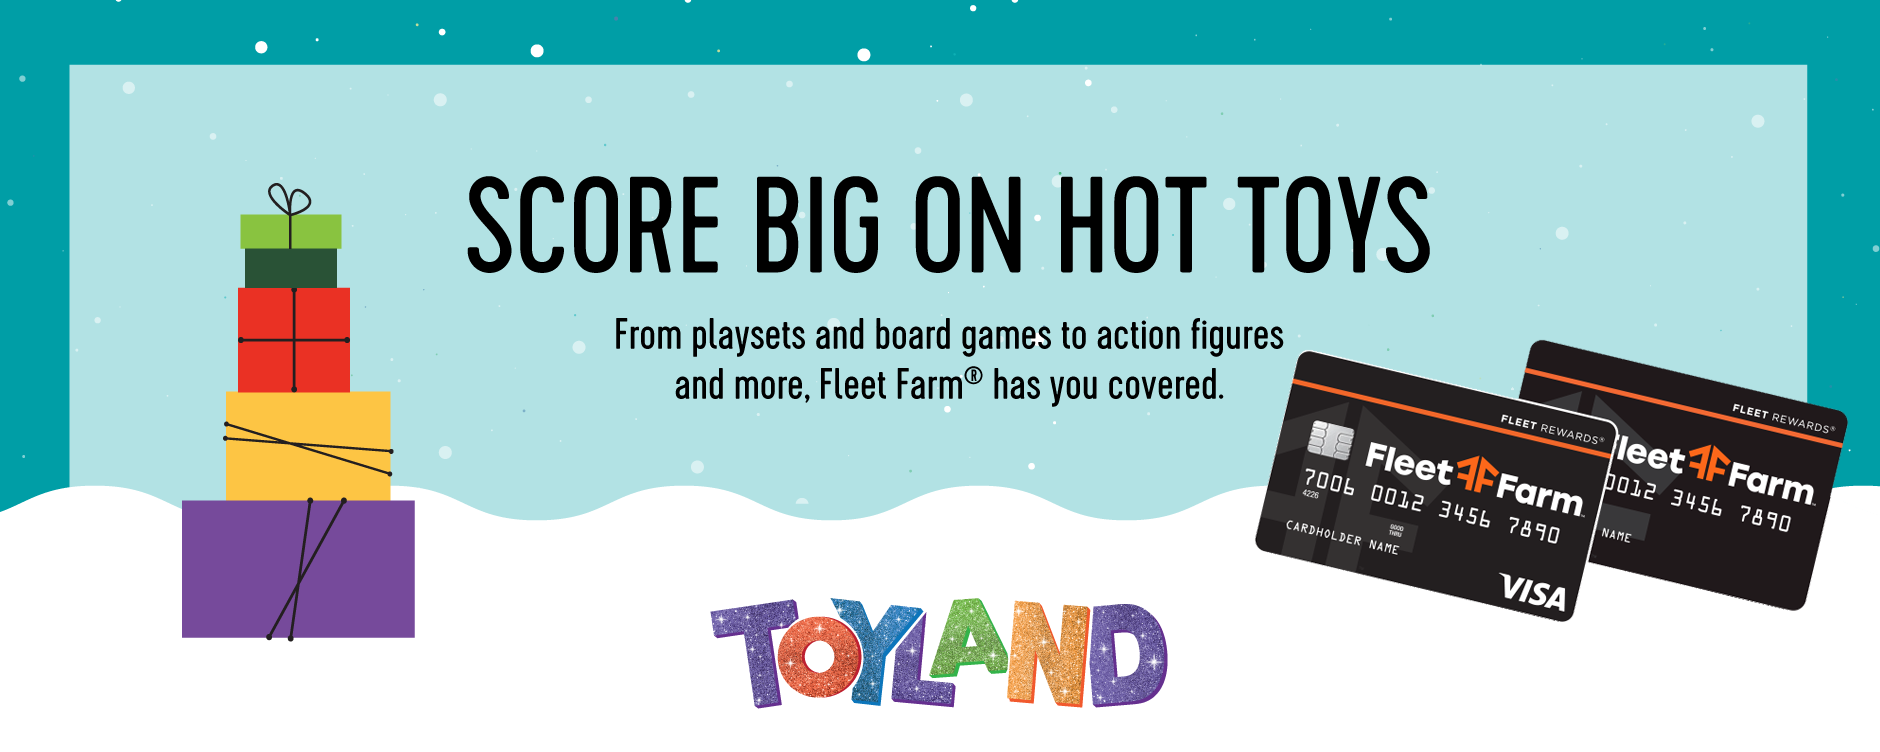 SCORE BIG ON HOT TOYS. From playsets and board games to action figures and more, Fleet Farm® has you covered. TOYLAND